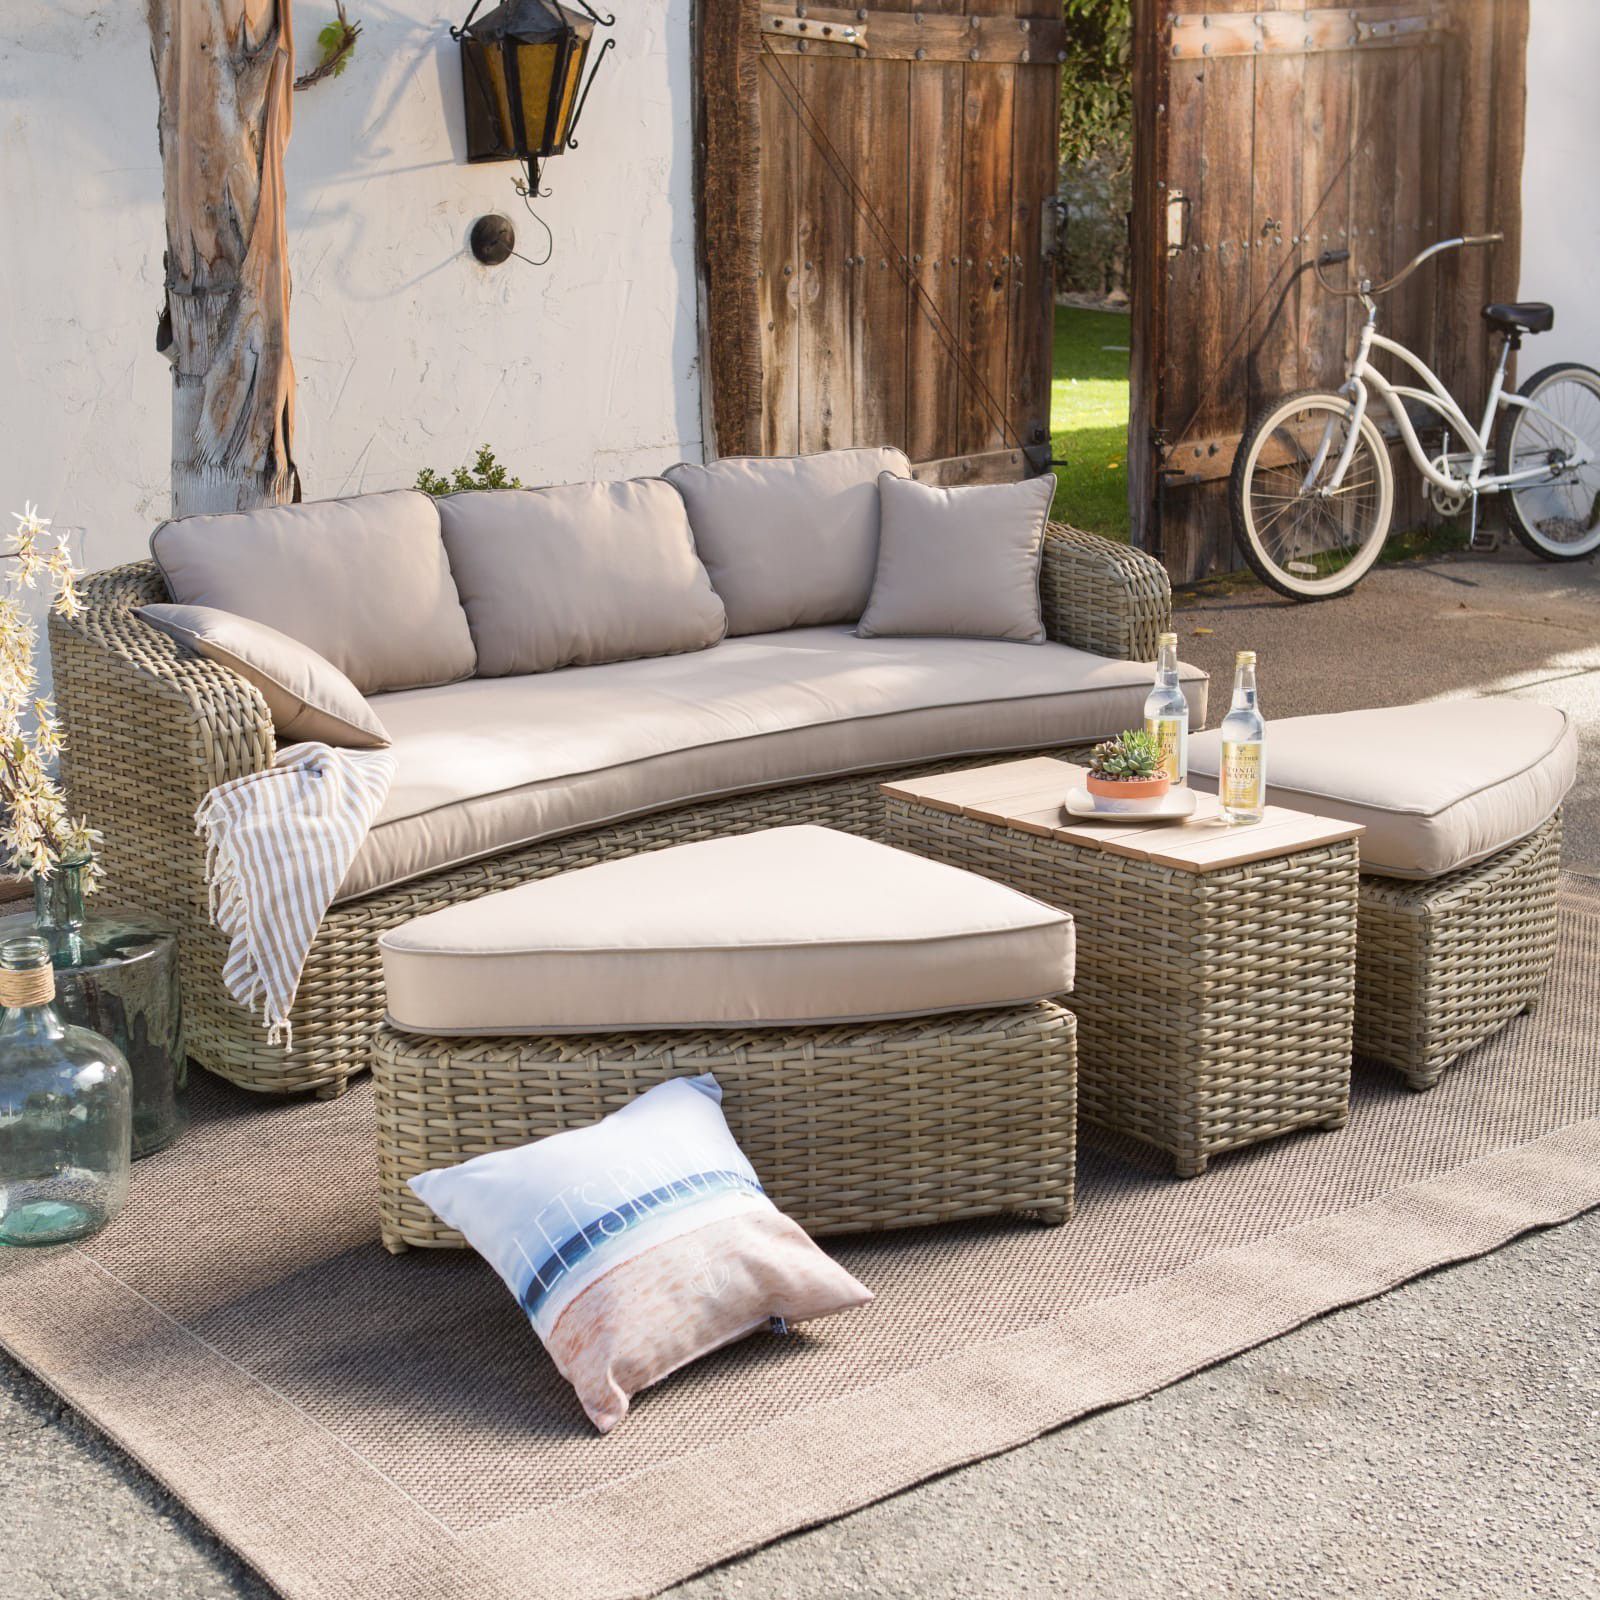 Gorgeous high quality wicker All Weather Wicker Sofa Daybed Sectional Set this set comes already assembled just open and enjoy